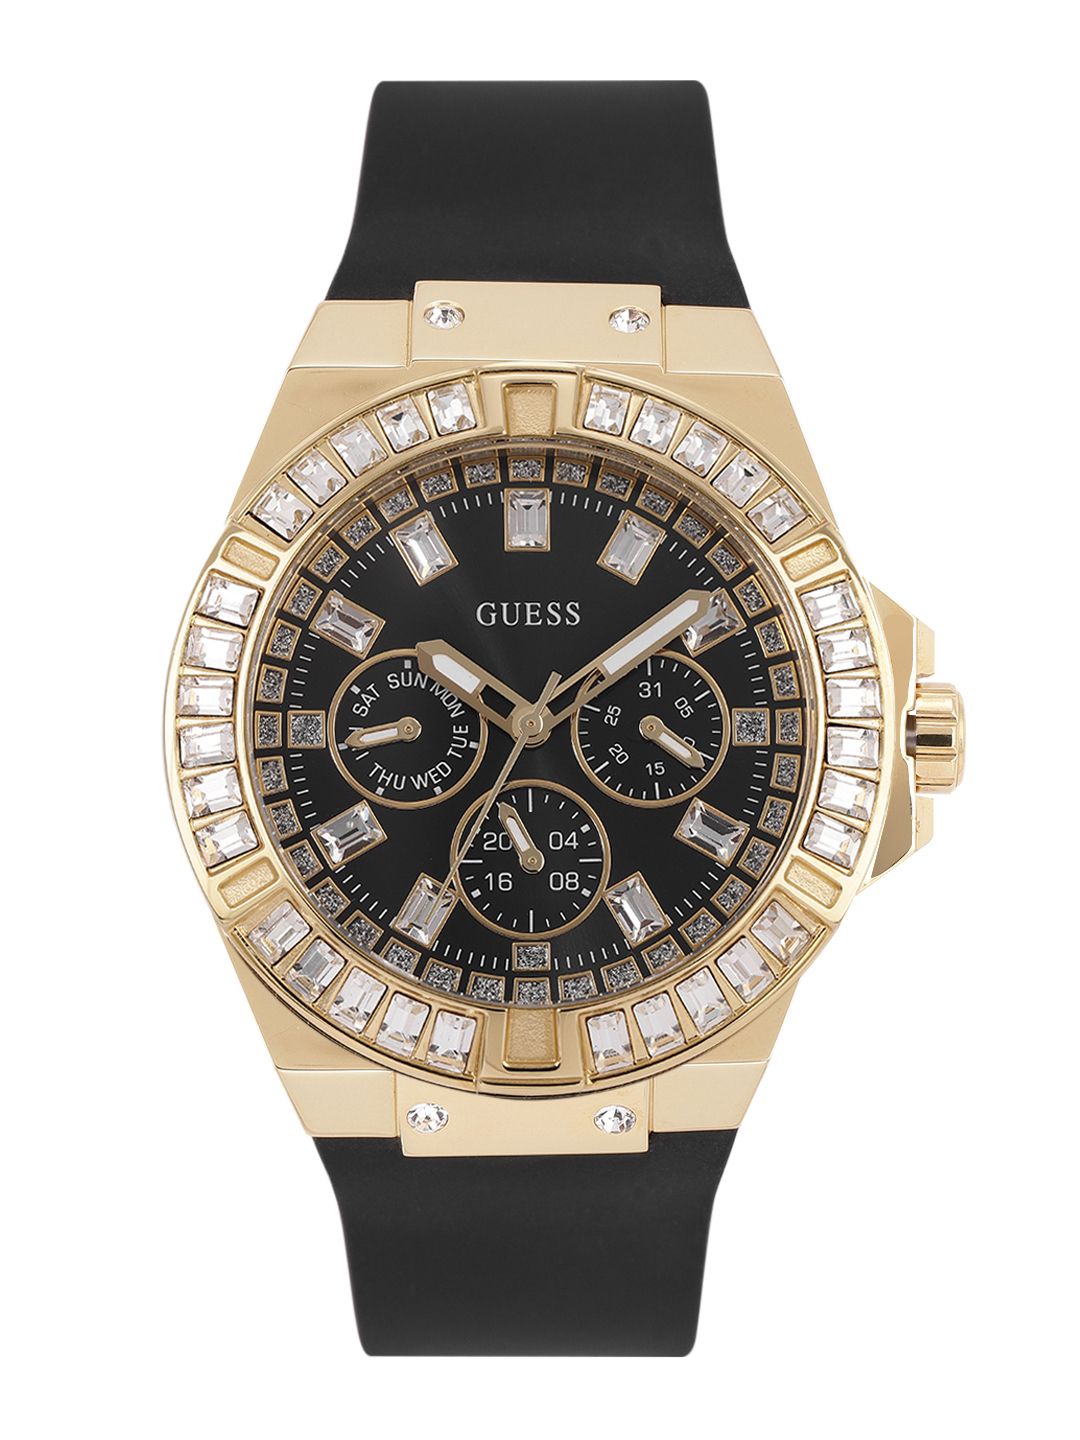 GUESS Women Black Embellished Analogue Chronograph Watch Price in India